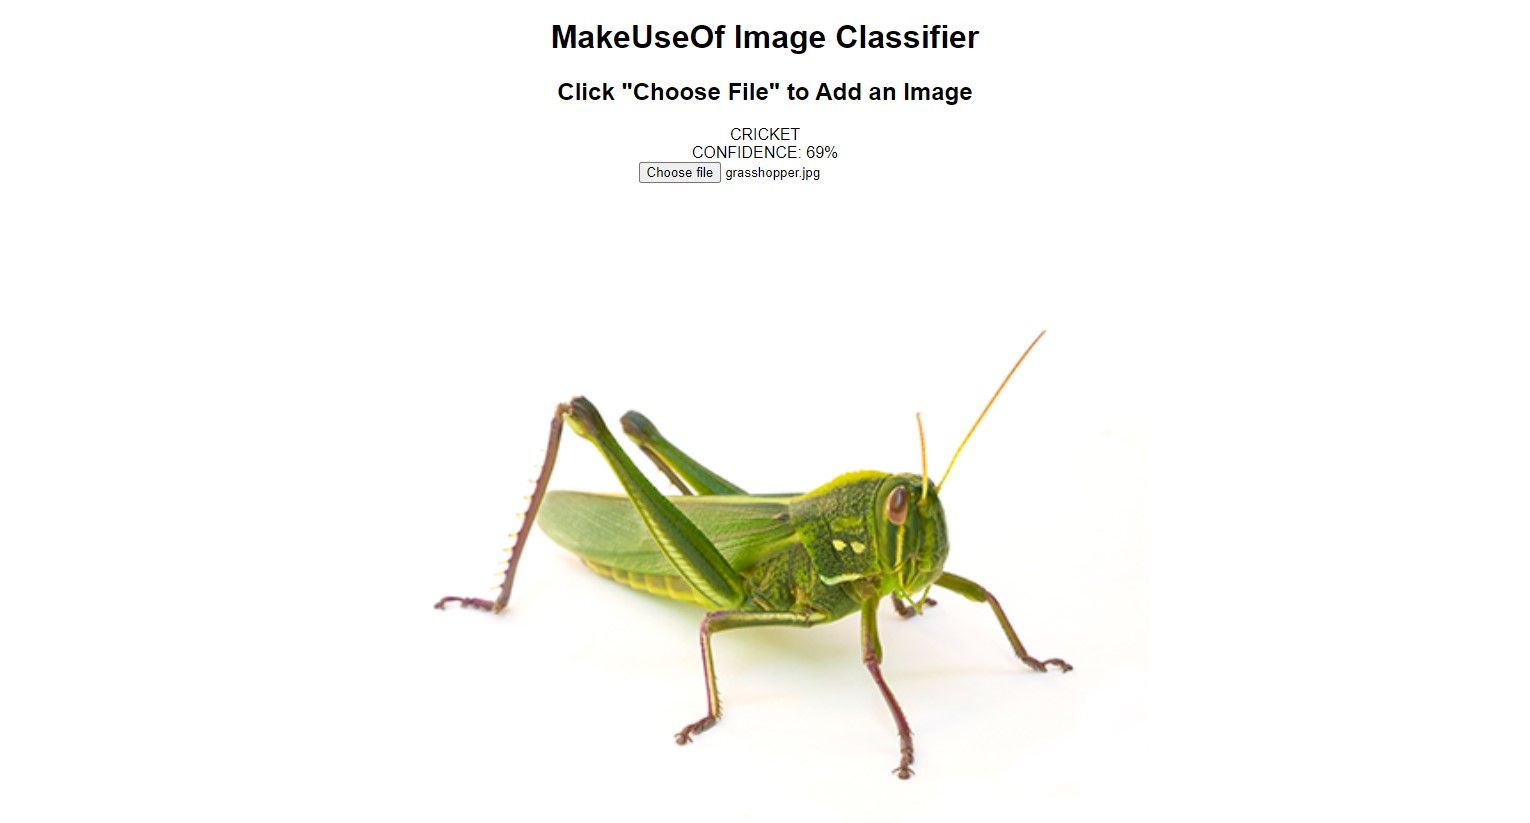 image classifier detecting a cricket